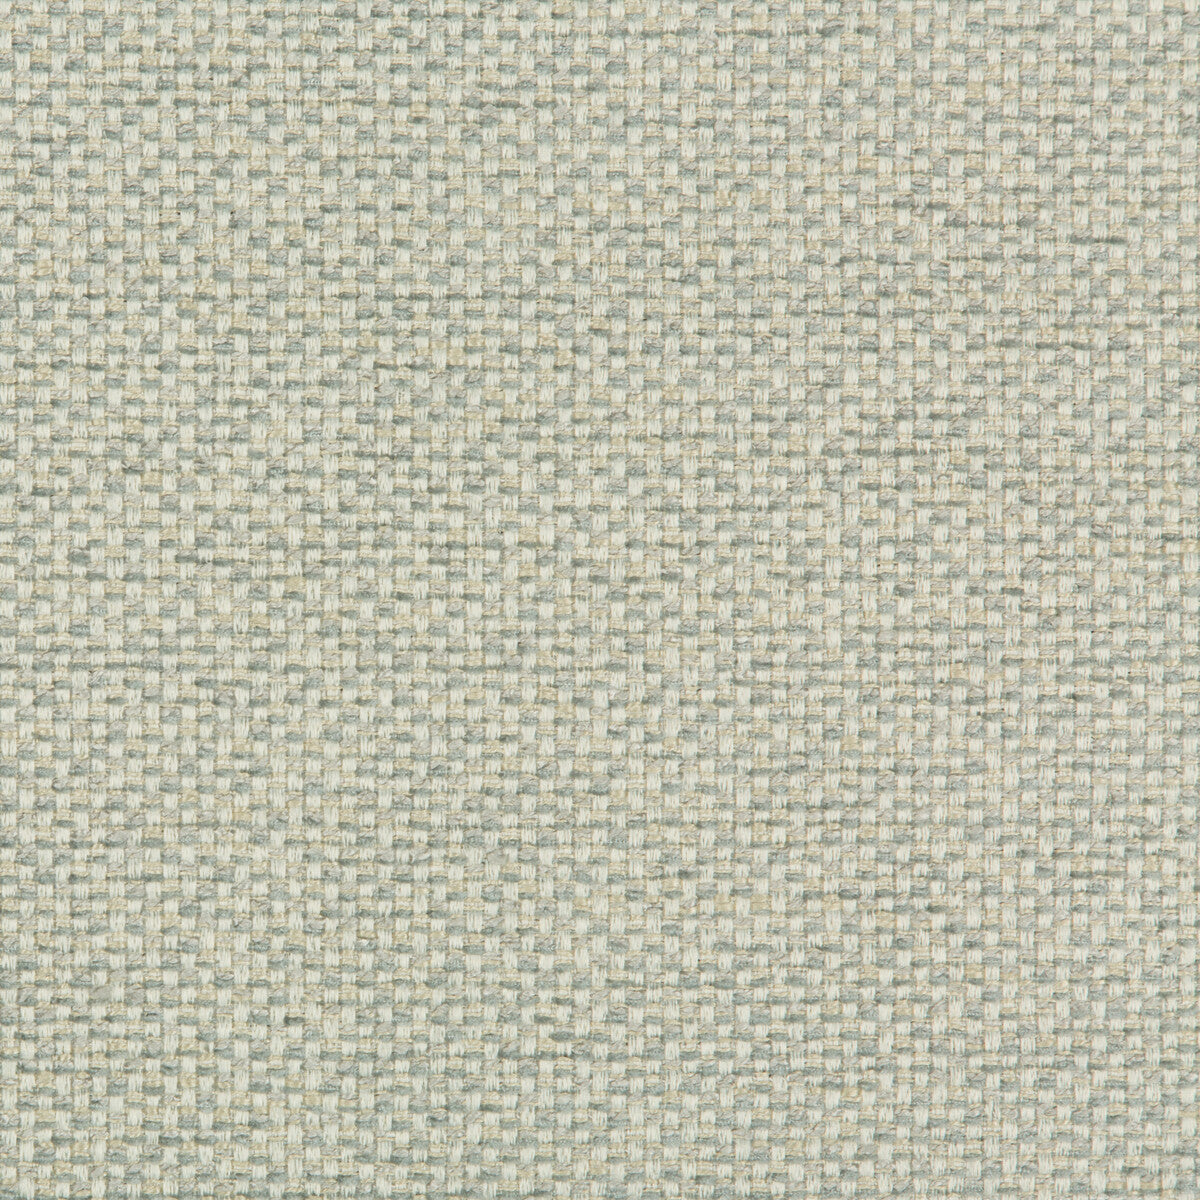 Kravet Design fabric in 34976-1611 color - pattern 34976.1611.0 - by Kravet Design in the Performance Crypton Home collection